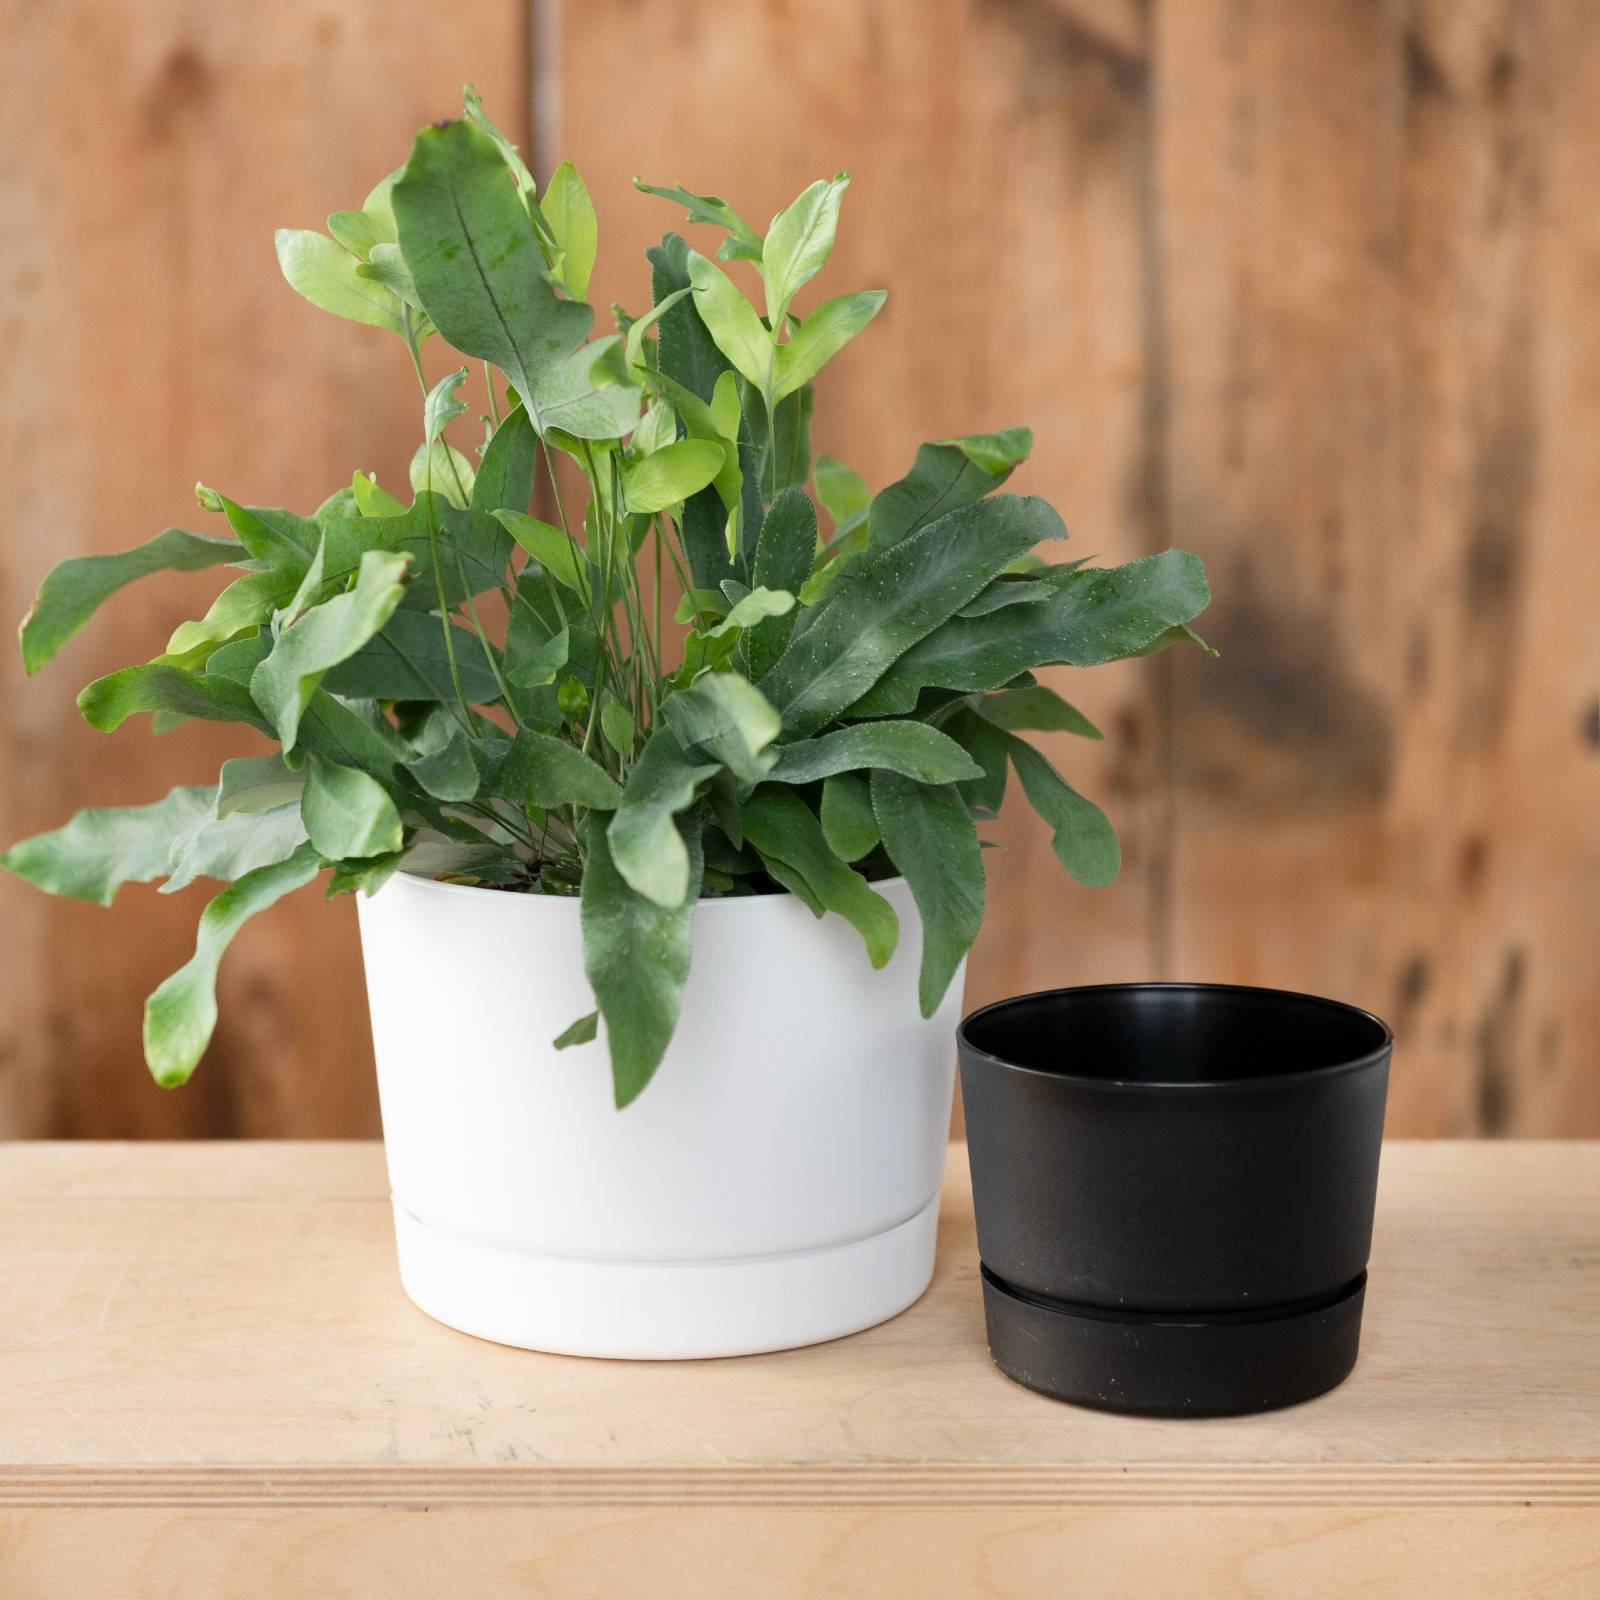 Green plant in a white mid-century modern planter next to an empty black MCM planter